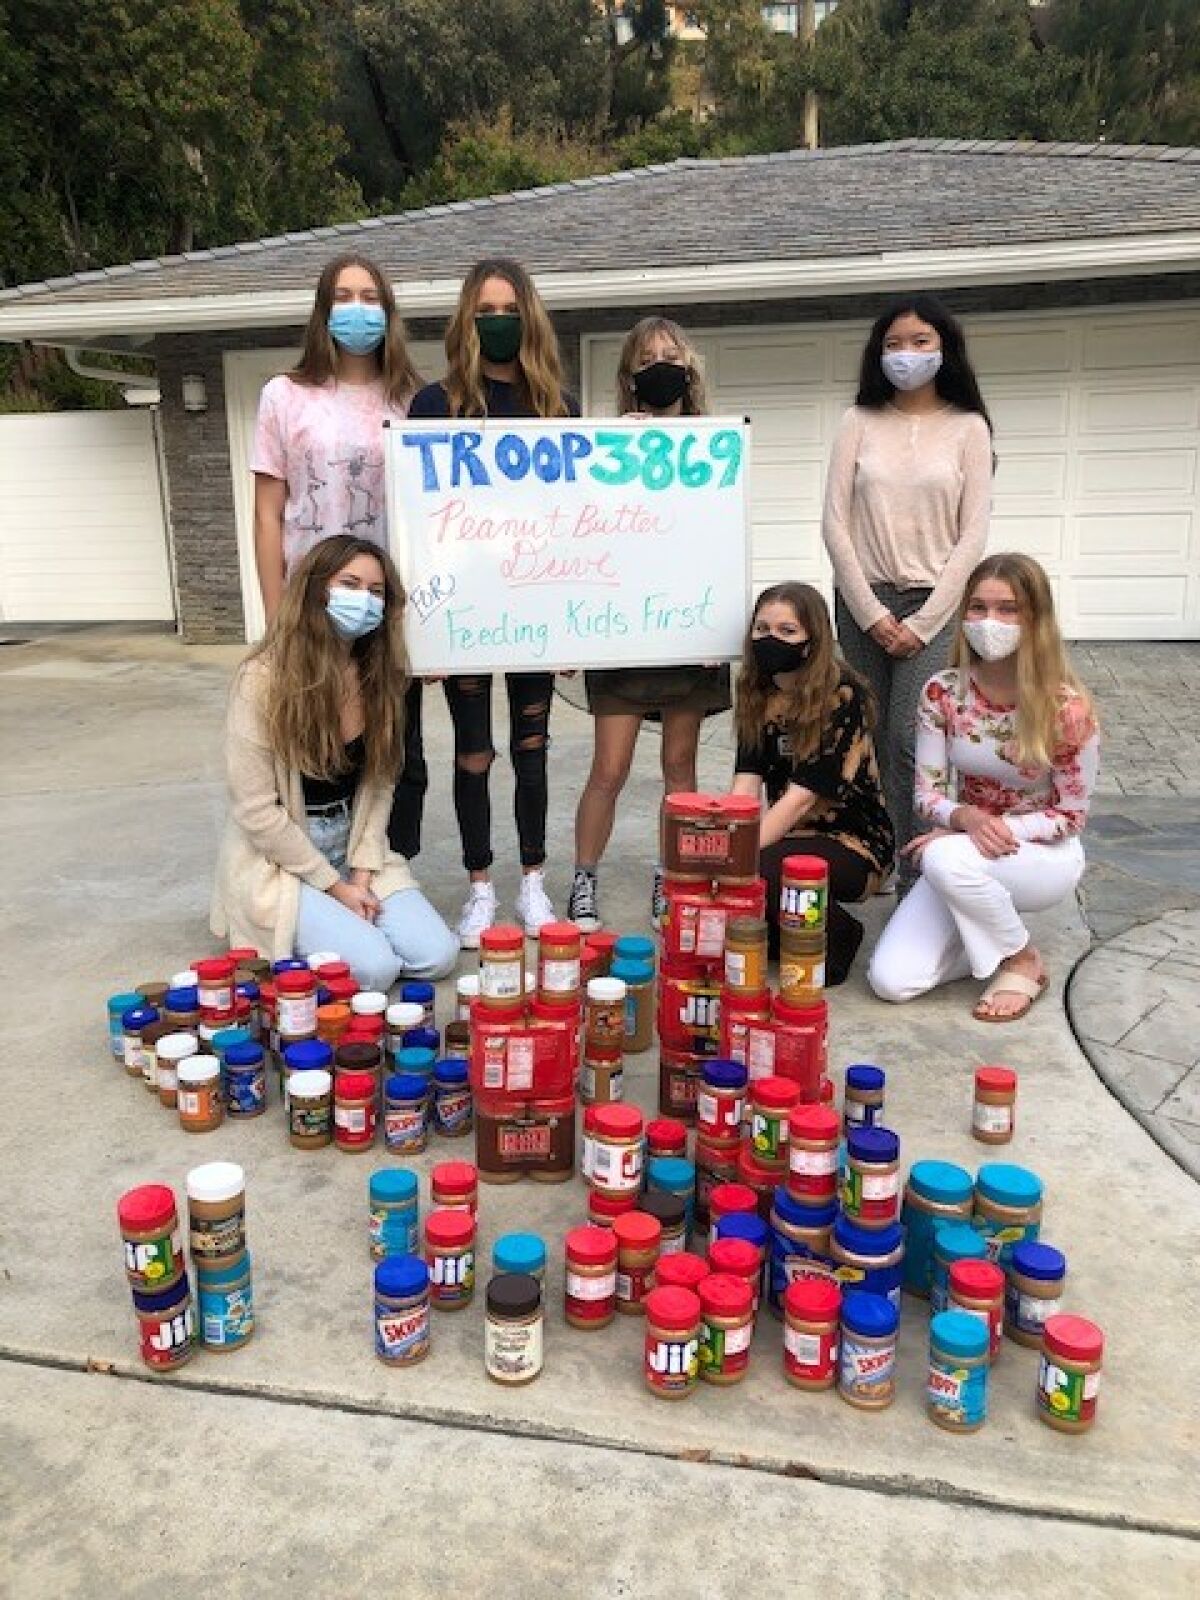 La Jolla-based Girl Scout Troop 3869 collected 130 jars of peanut butter during a food drive.